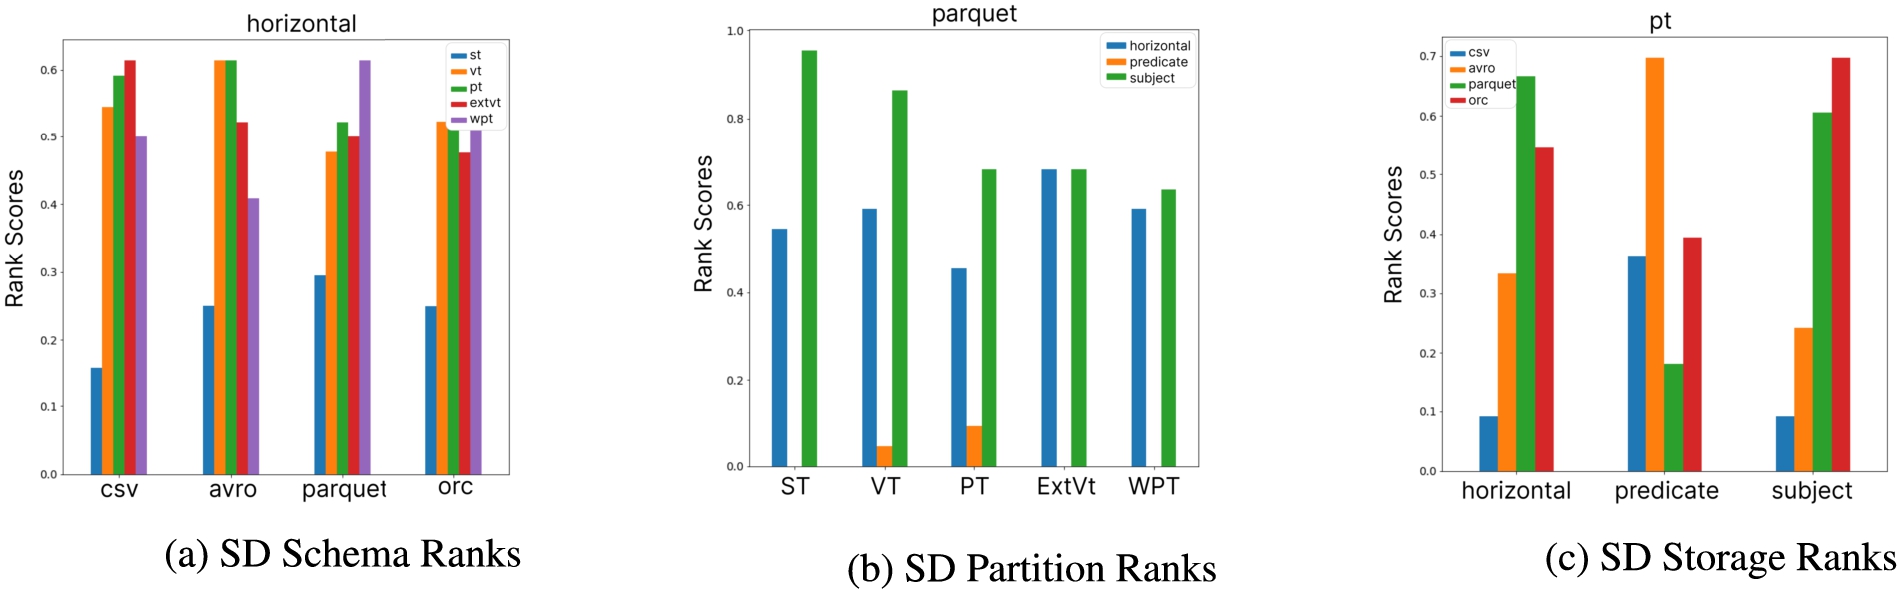 Examples on SD rank scores over different dimensions (100M), the higher the better.